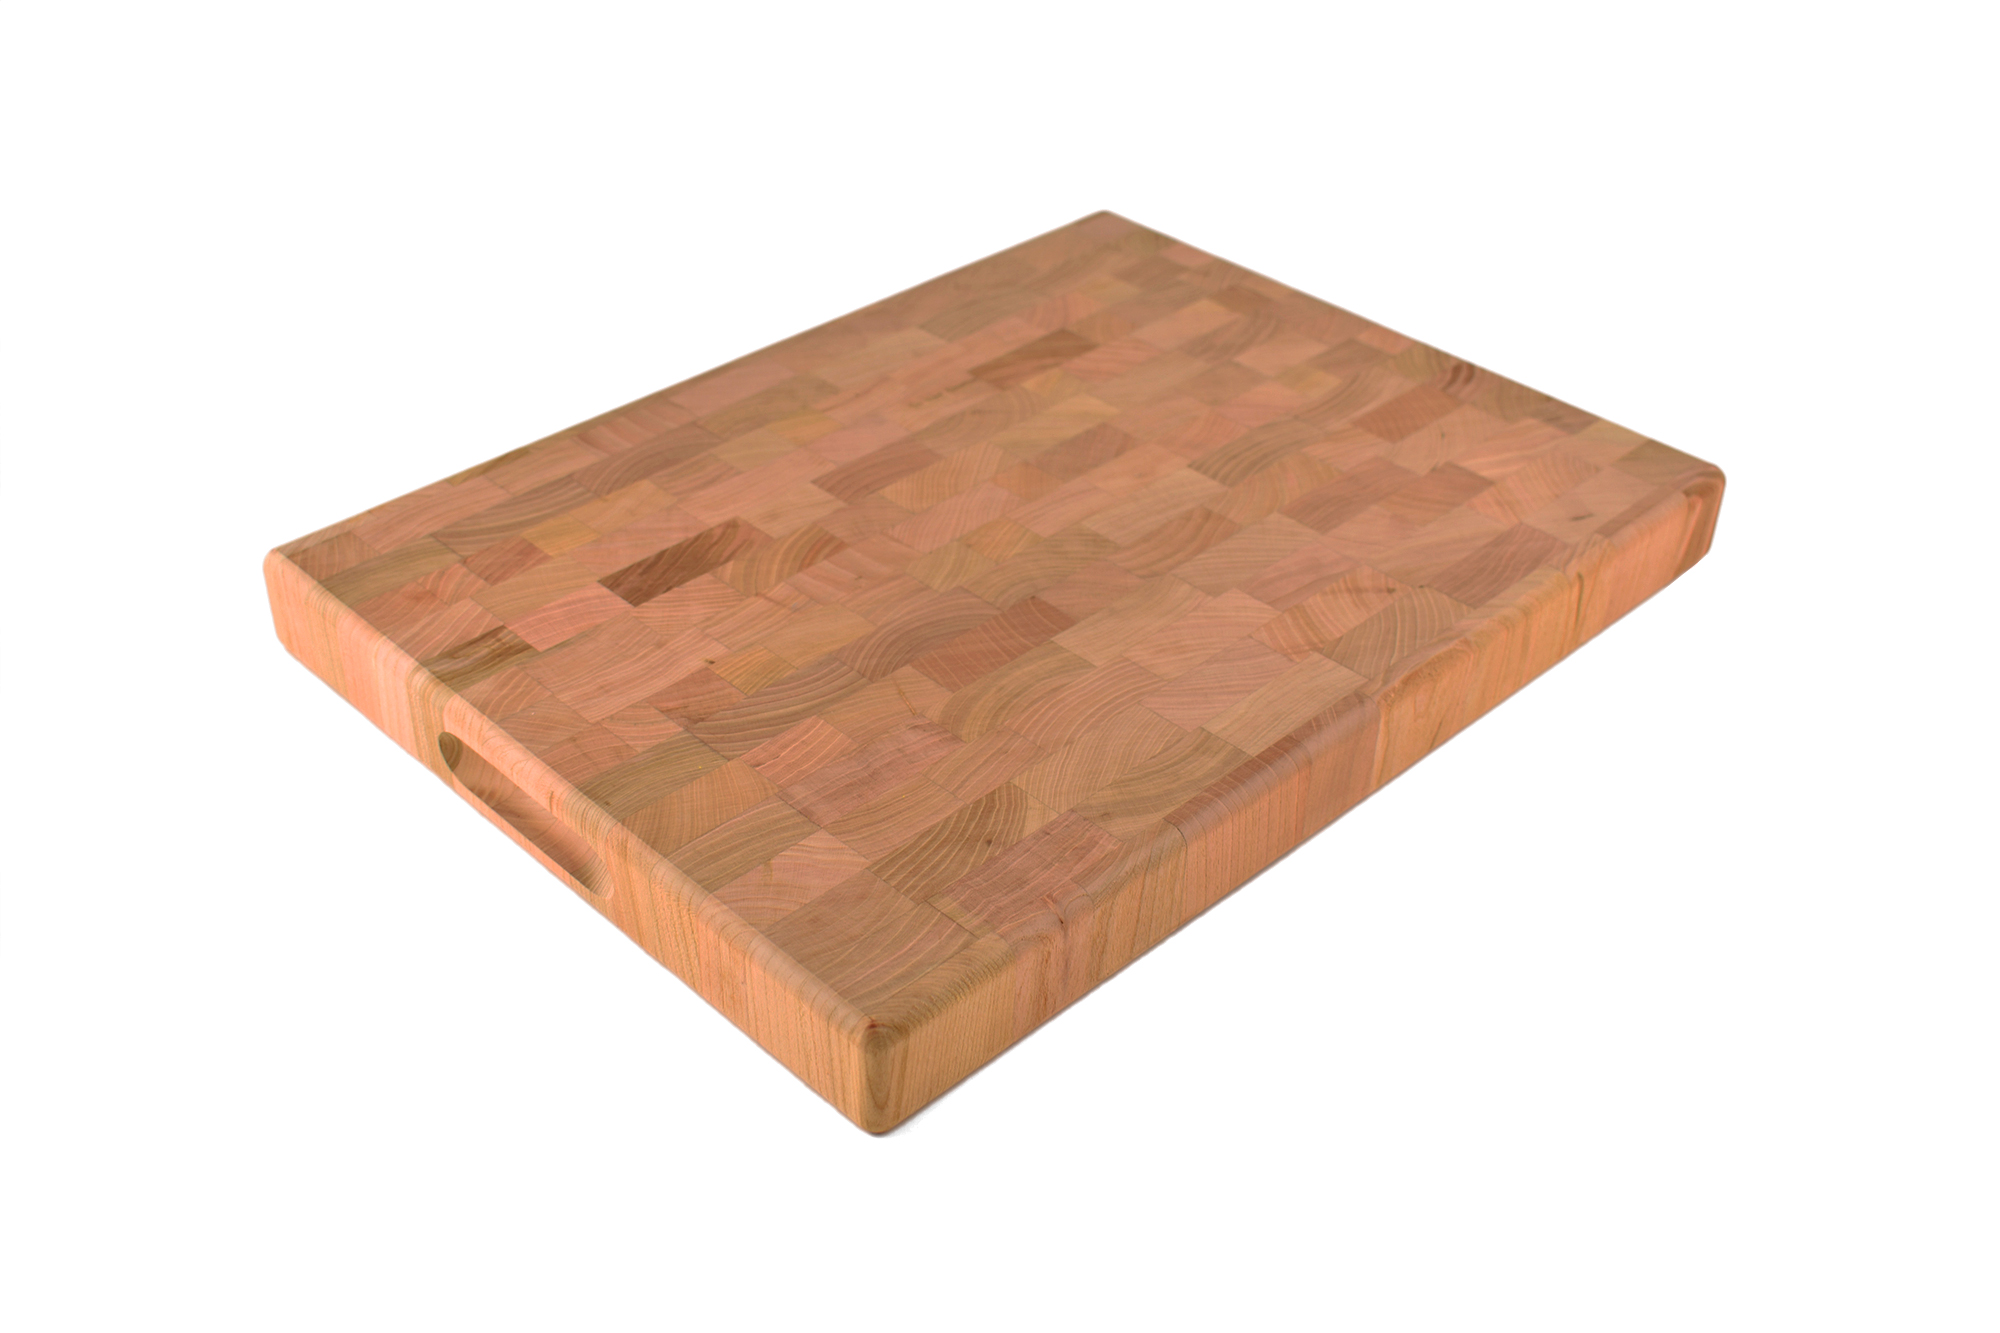 Medium Cherry End grain butcher block with side handle indends